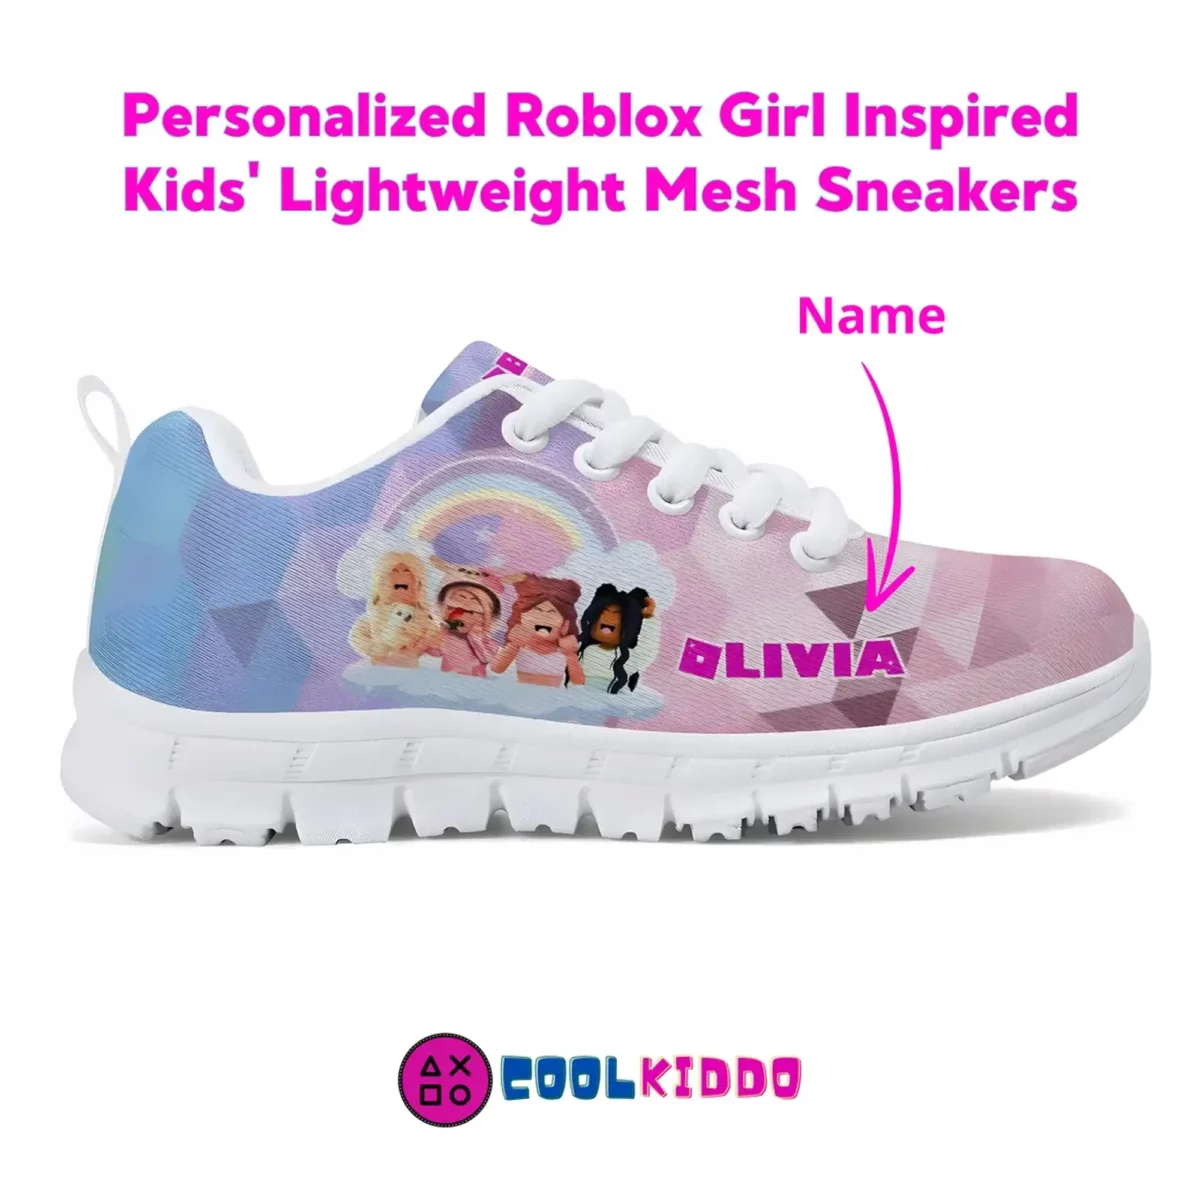 Roblox Girls Personalized Lightweight Mesh Sneakers Inspired by Roblox Girl Video Games Cool Kiddo 10